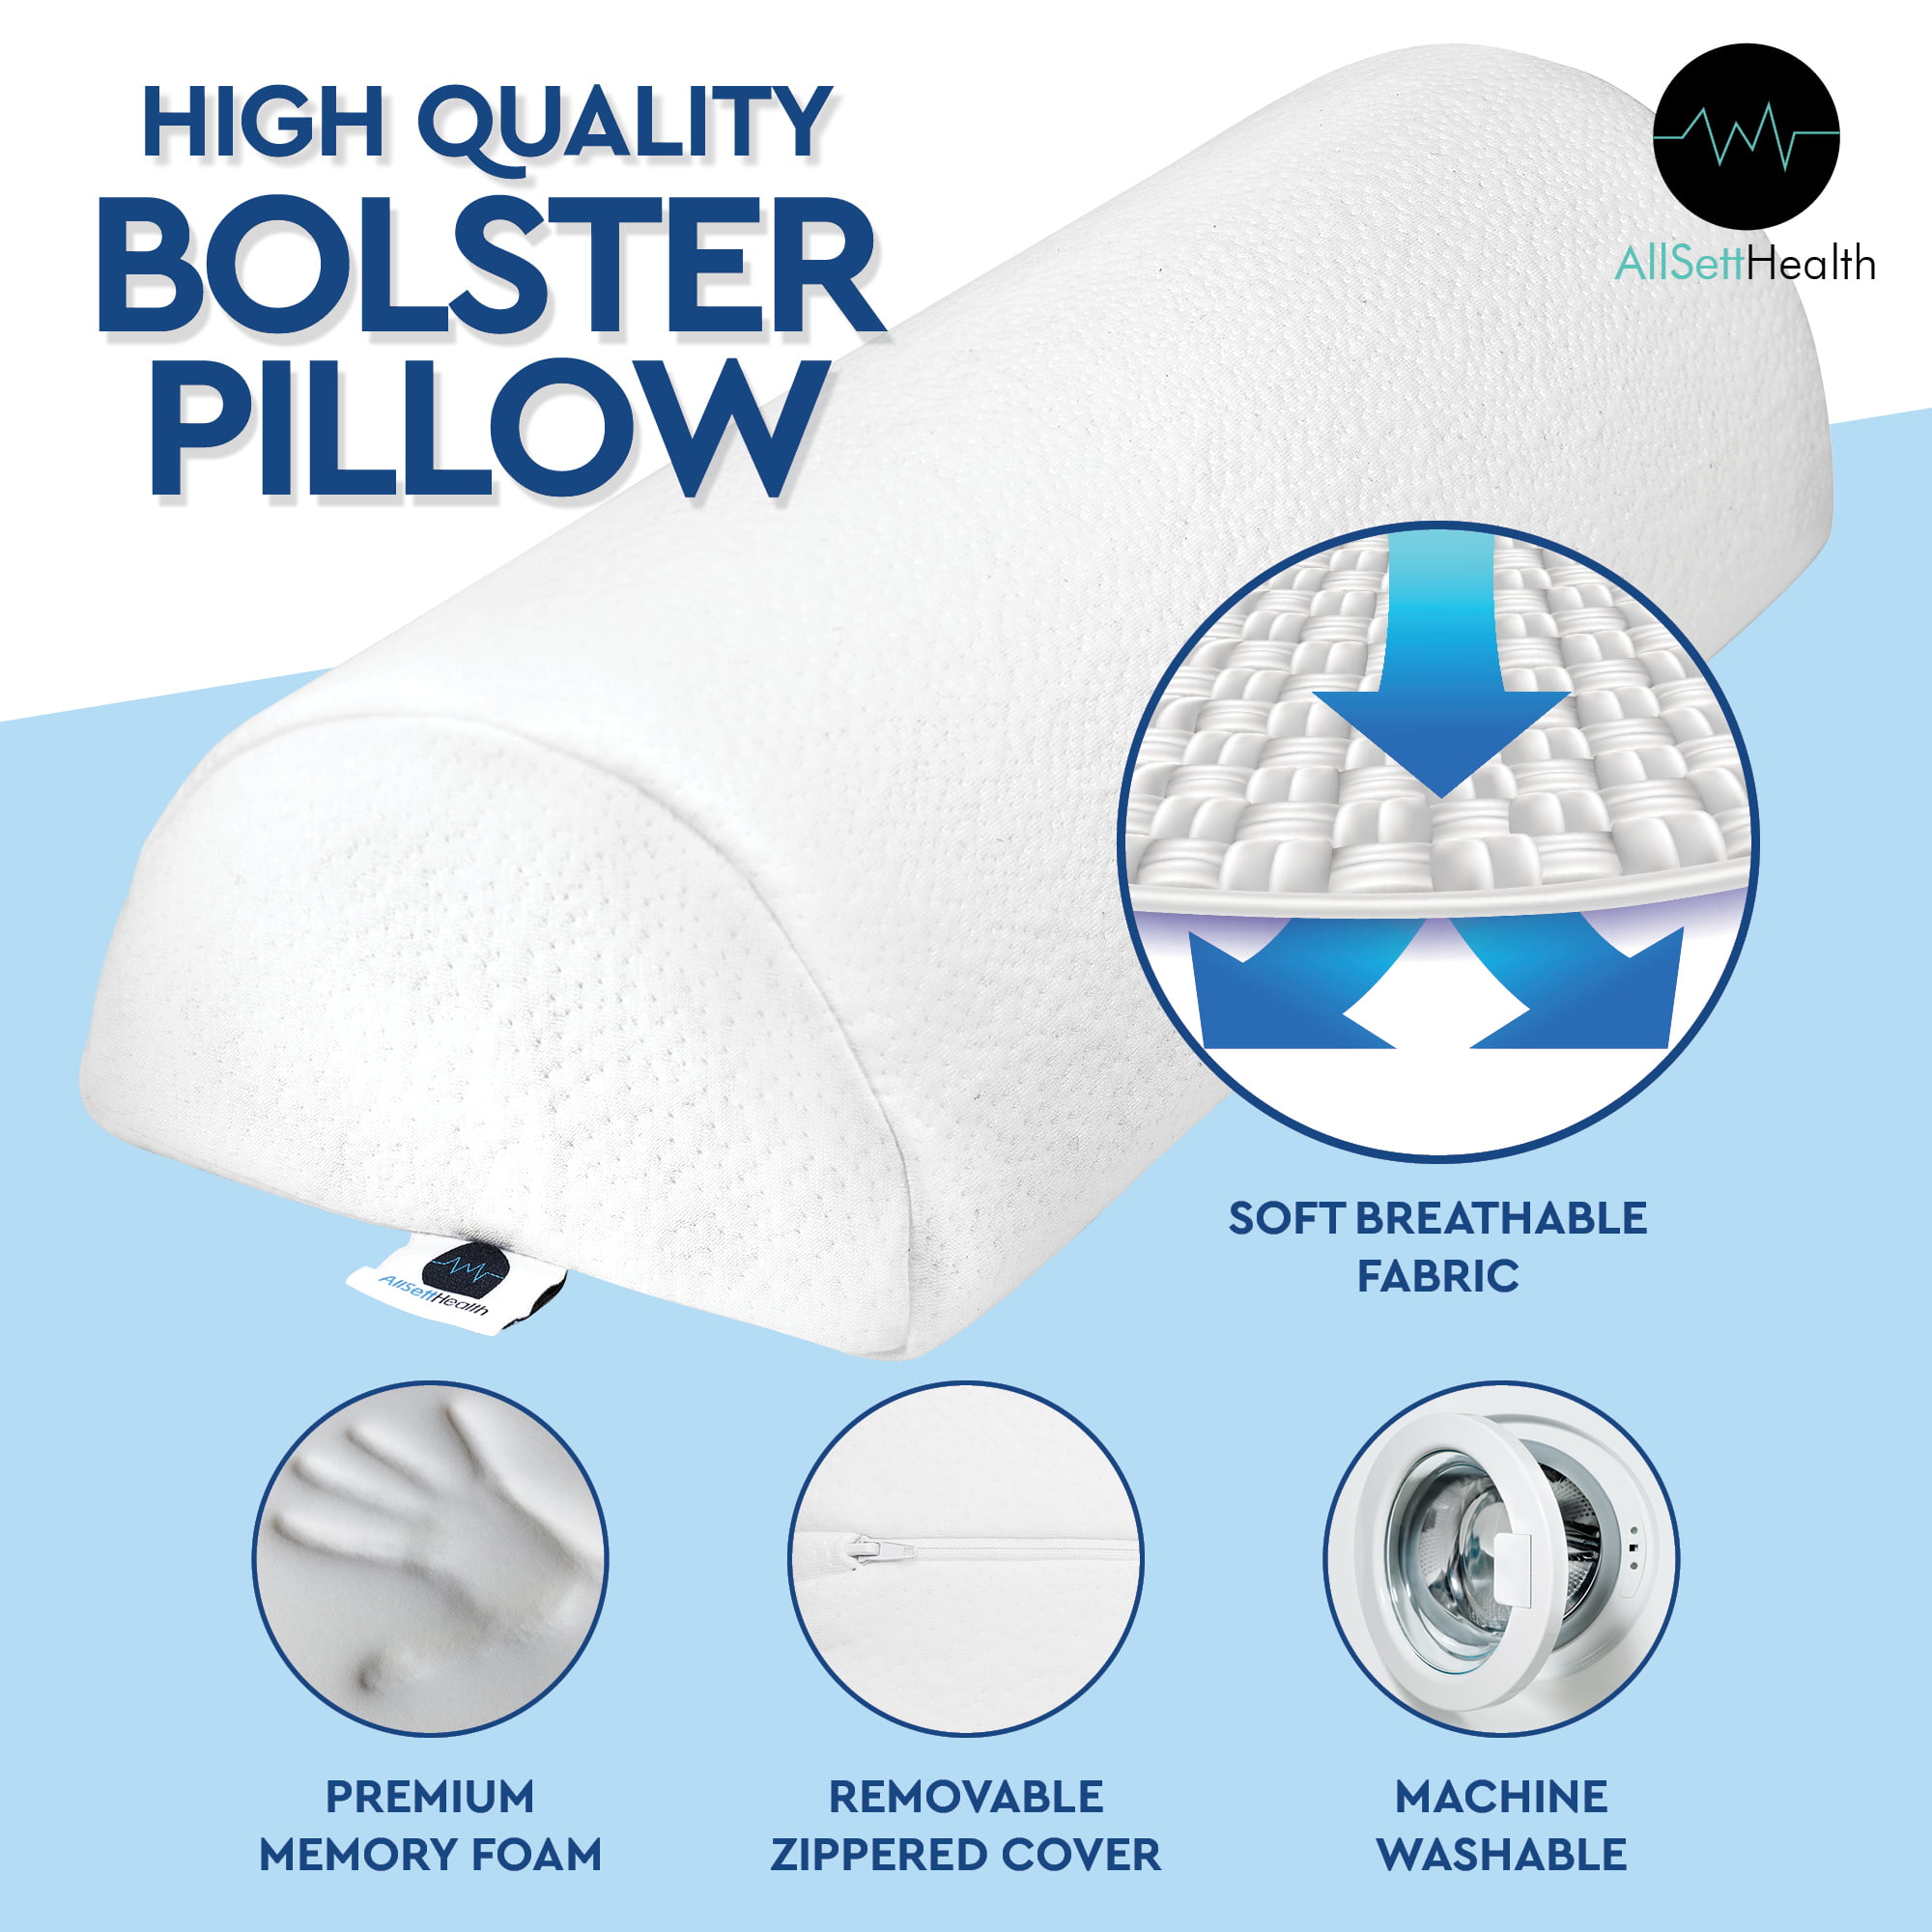 Forias Half Moon Bolster Pillow for Legs Knees Lower Back Neck Pain Relief,  Pure Memory Foam Semi Roll Pillow for Head Bed Sleeping Ankle Lumbar Support  Leg Elevation Foot Comfort